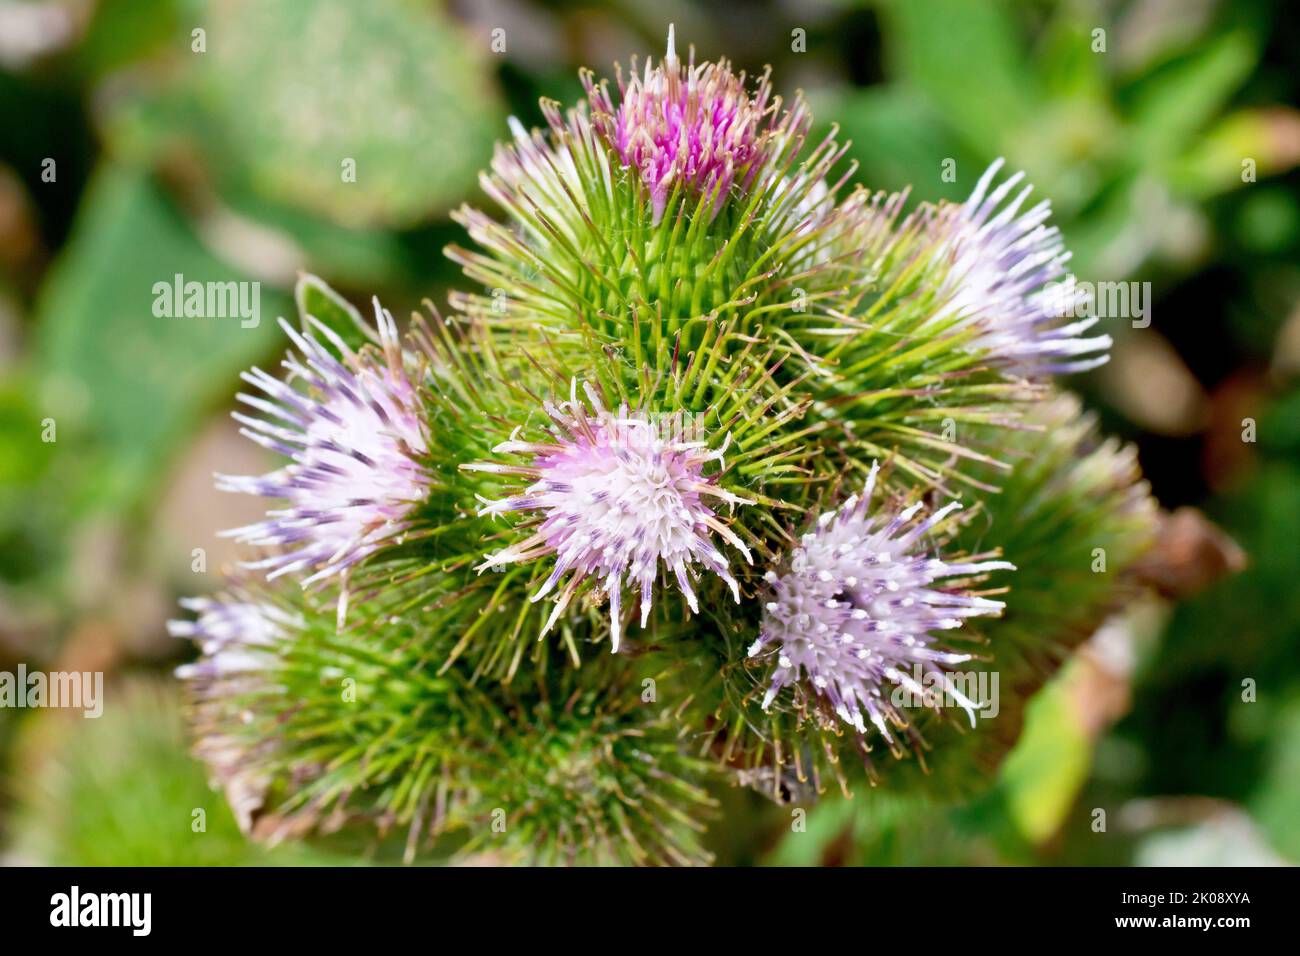 Lesser Burdock (arctium minus), close up showing a cluster of individual flowerheads each made up of several individual flowers or florets. Stock Photo